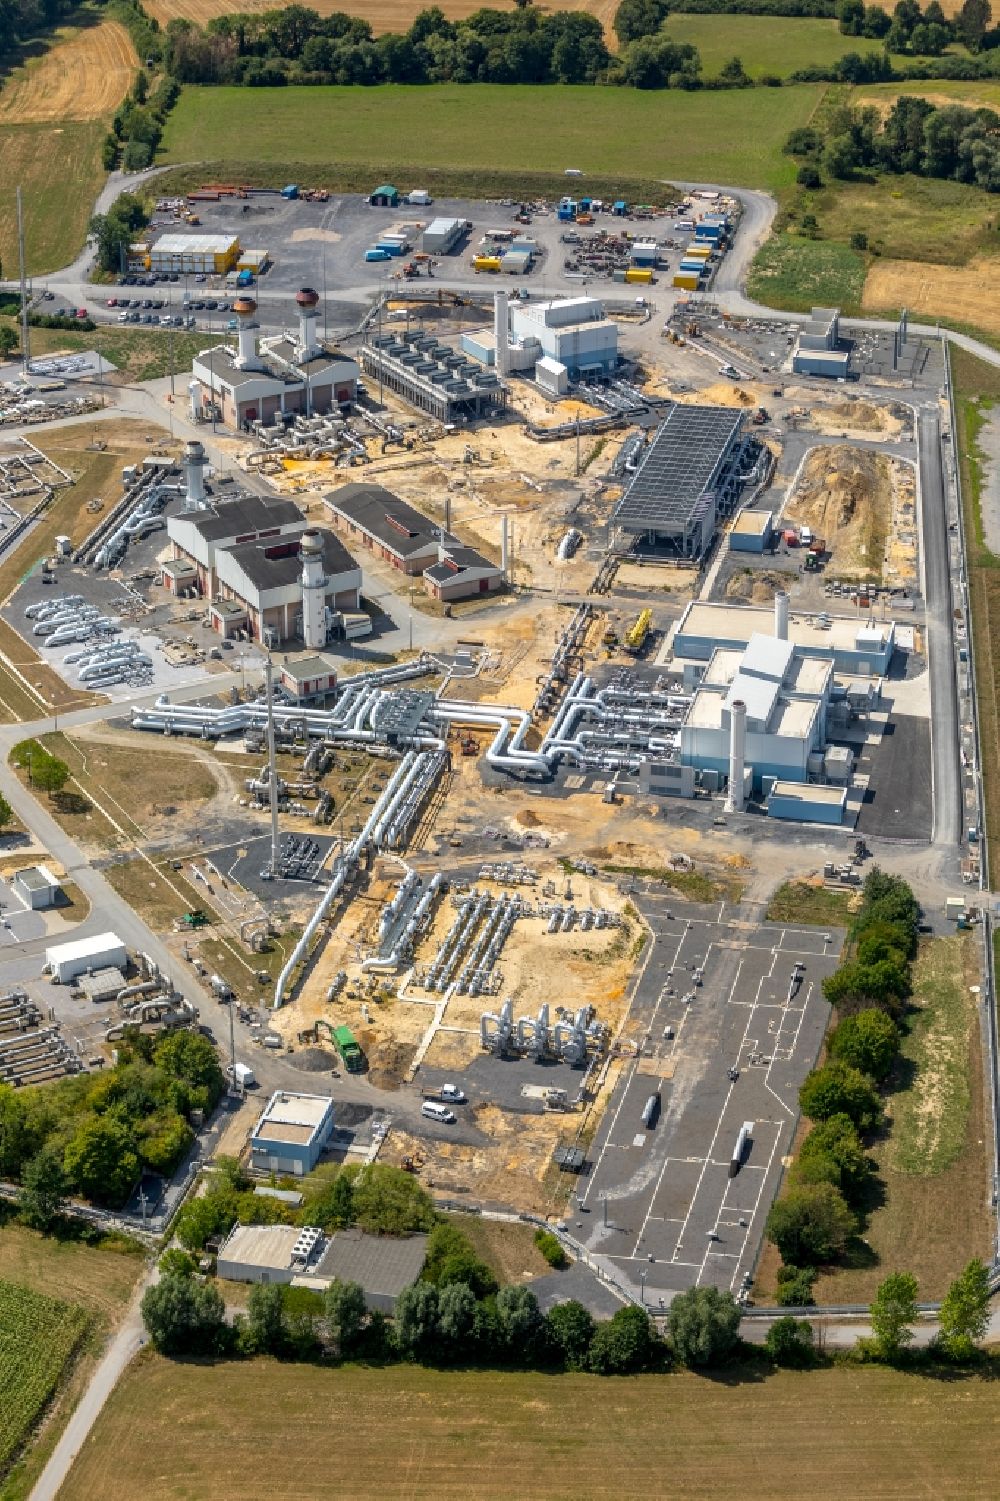 Aerial image Werne - Compressor Stadium and pumping station for natural gas of Open Grid Europe in Werne in the state North Rhine-Westphalia